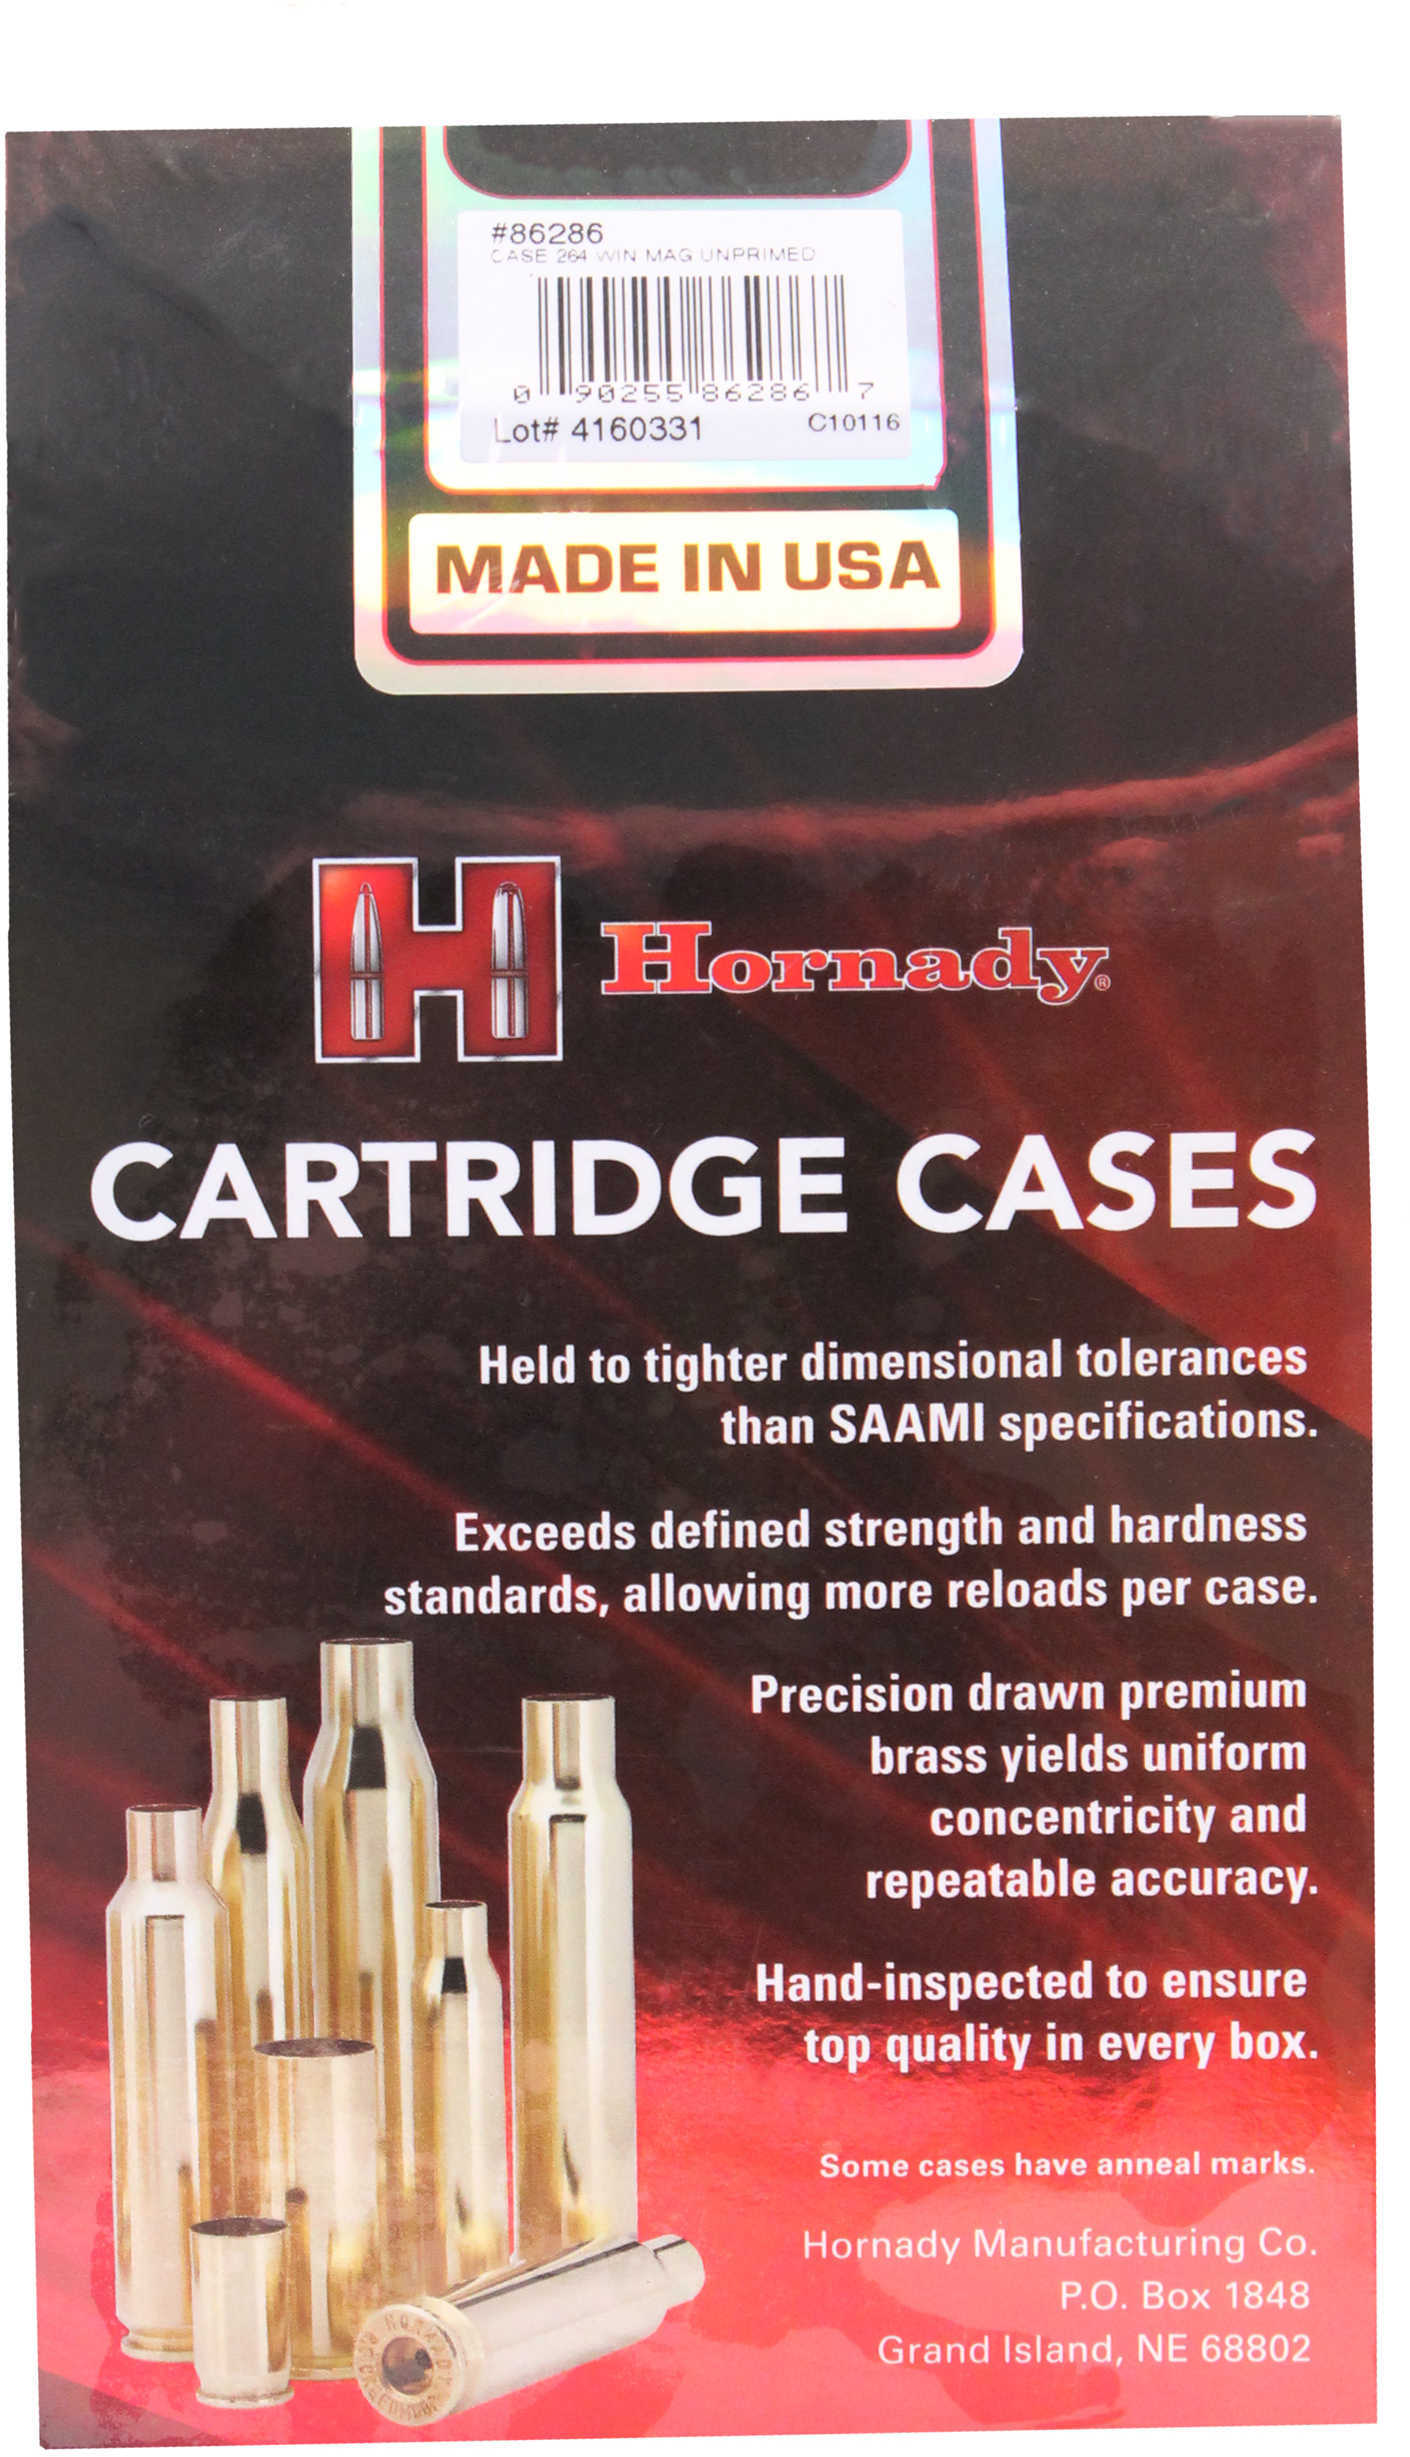 Hornady 264 Winchester Magnum Unprimed Cases 50 Per Box Md: 86286